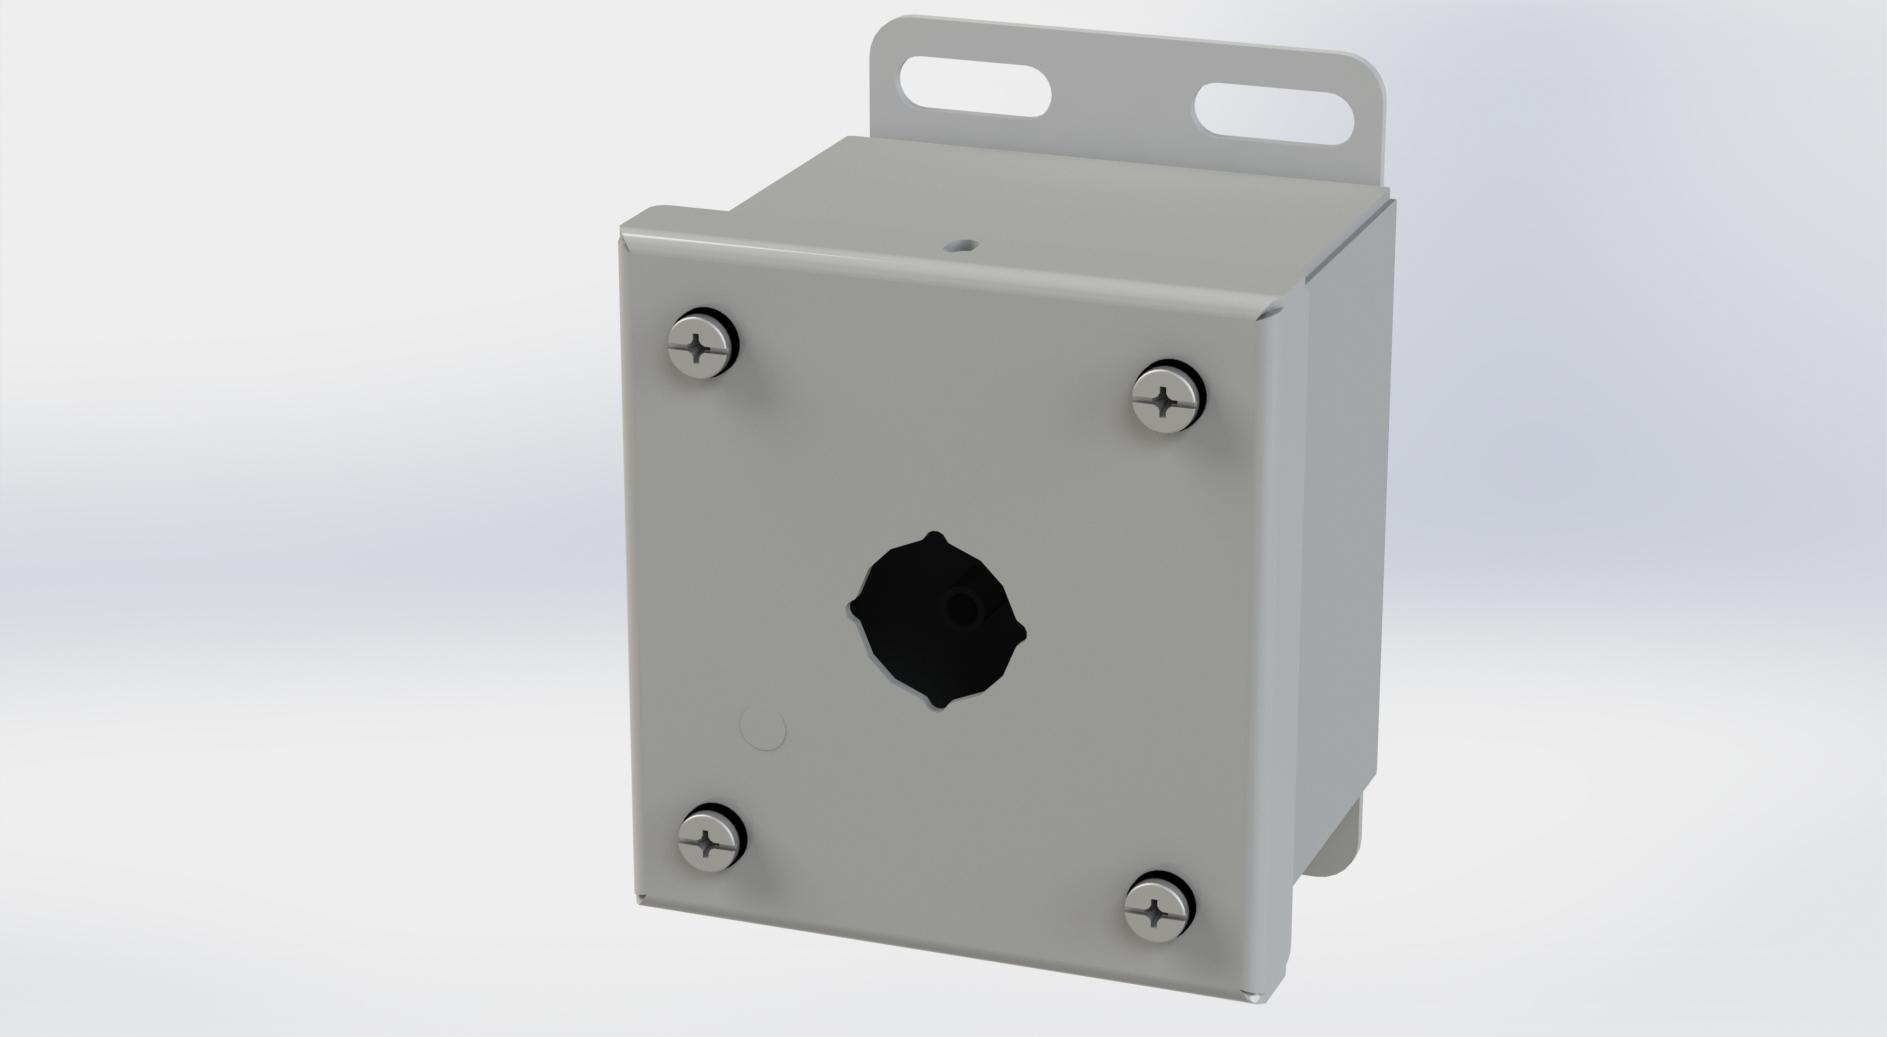 Saginaw Control SCE-1PBI PB Enclosure, Height:3.50", Width:3.25", Depth:2.75", ANSI-61 gray powder coat inside and out. 